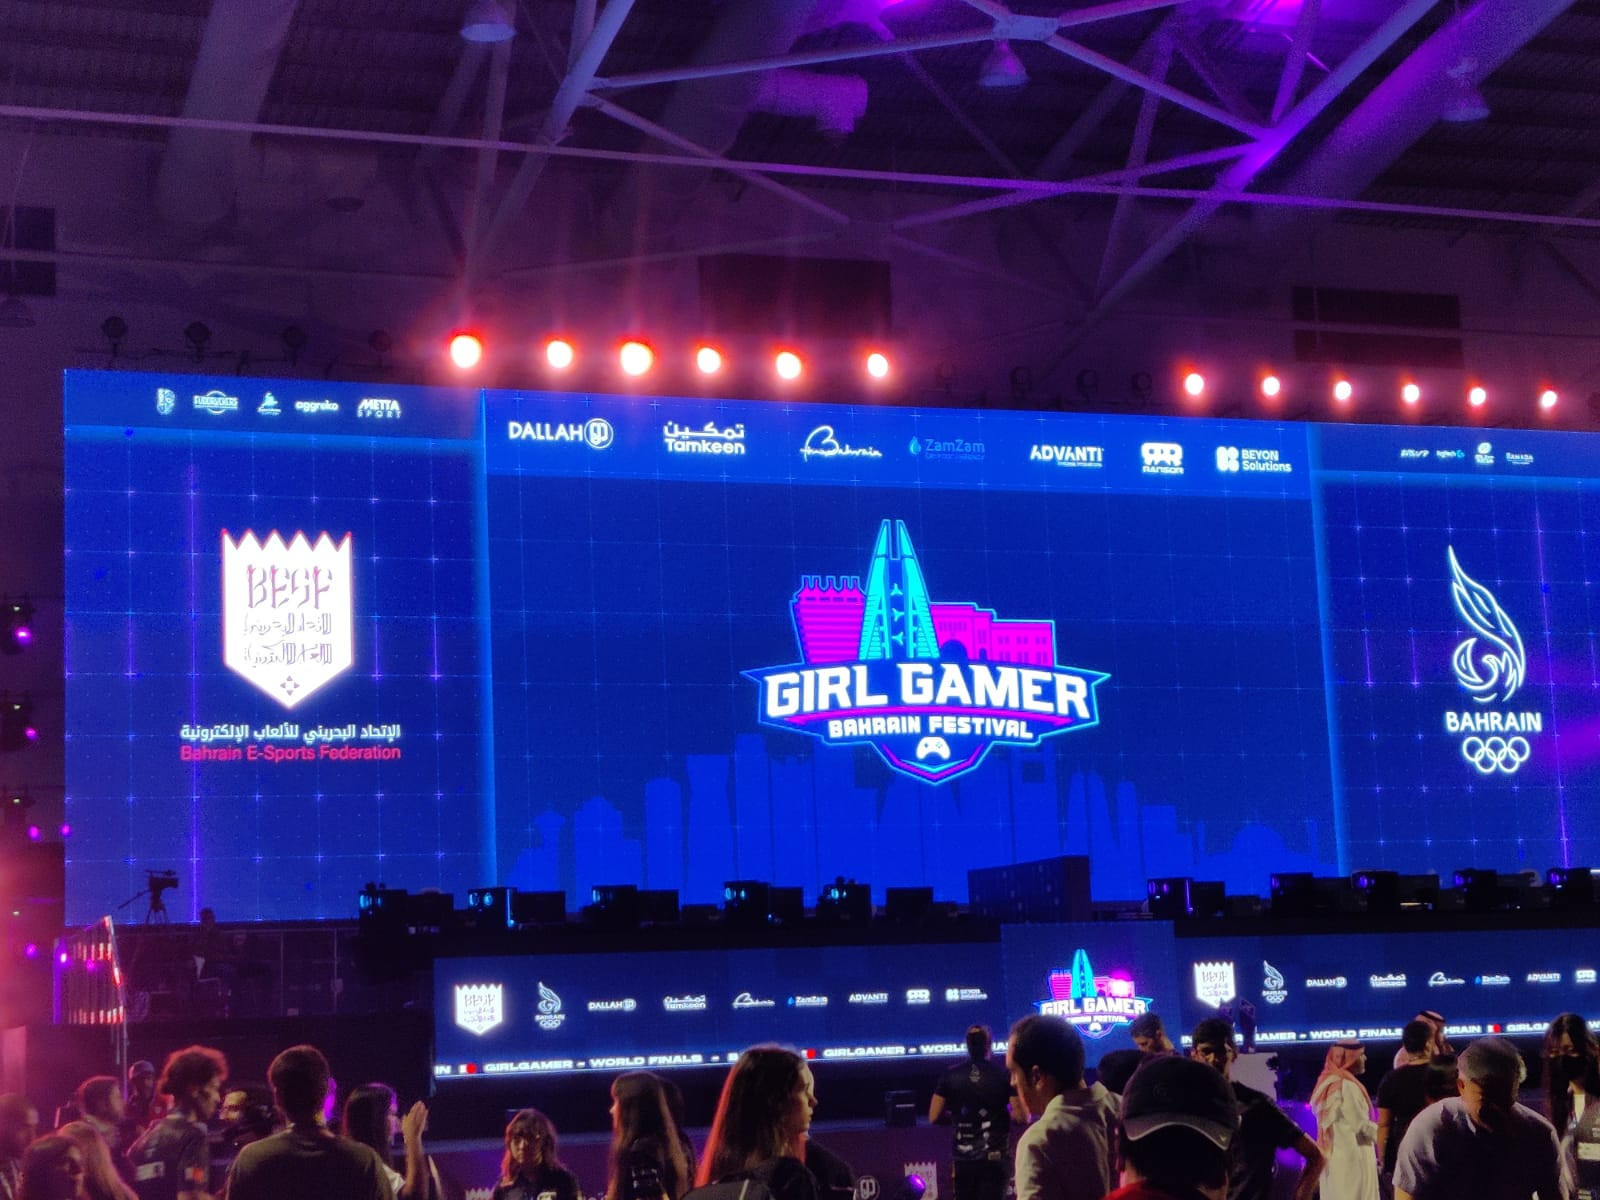 Champions crowned at Girl Gamer World Finals in Bahrain